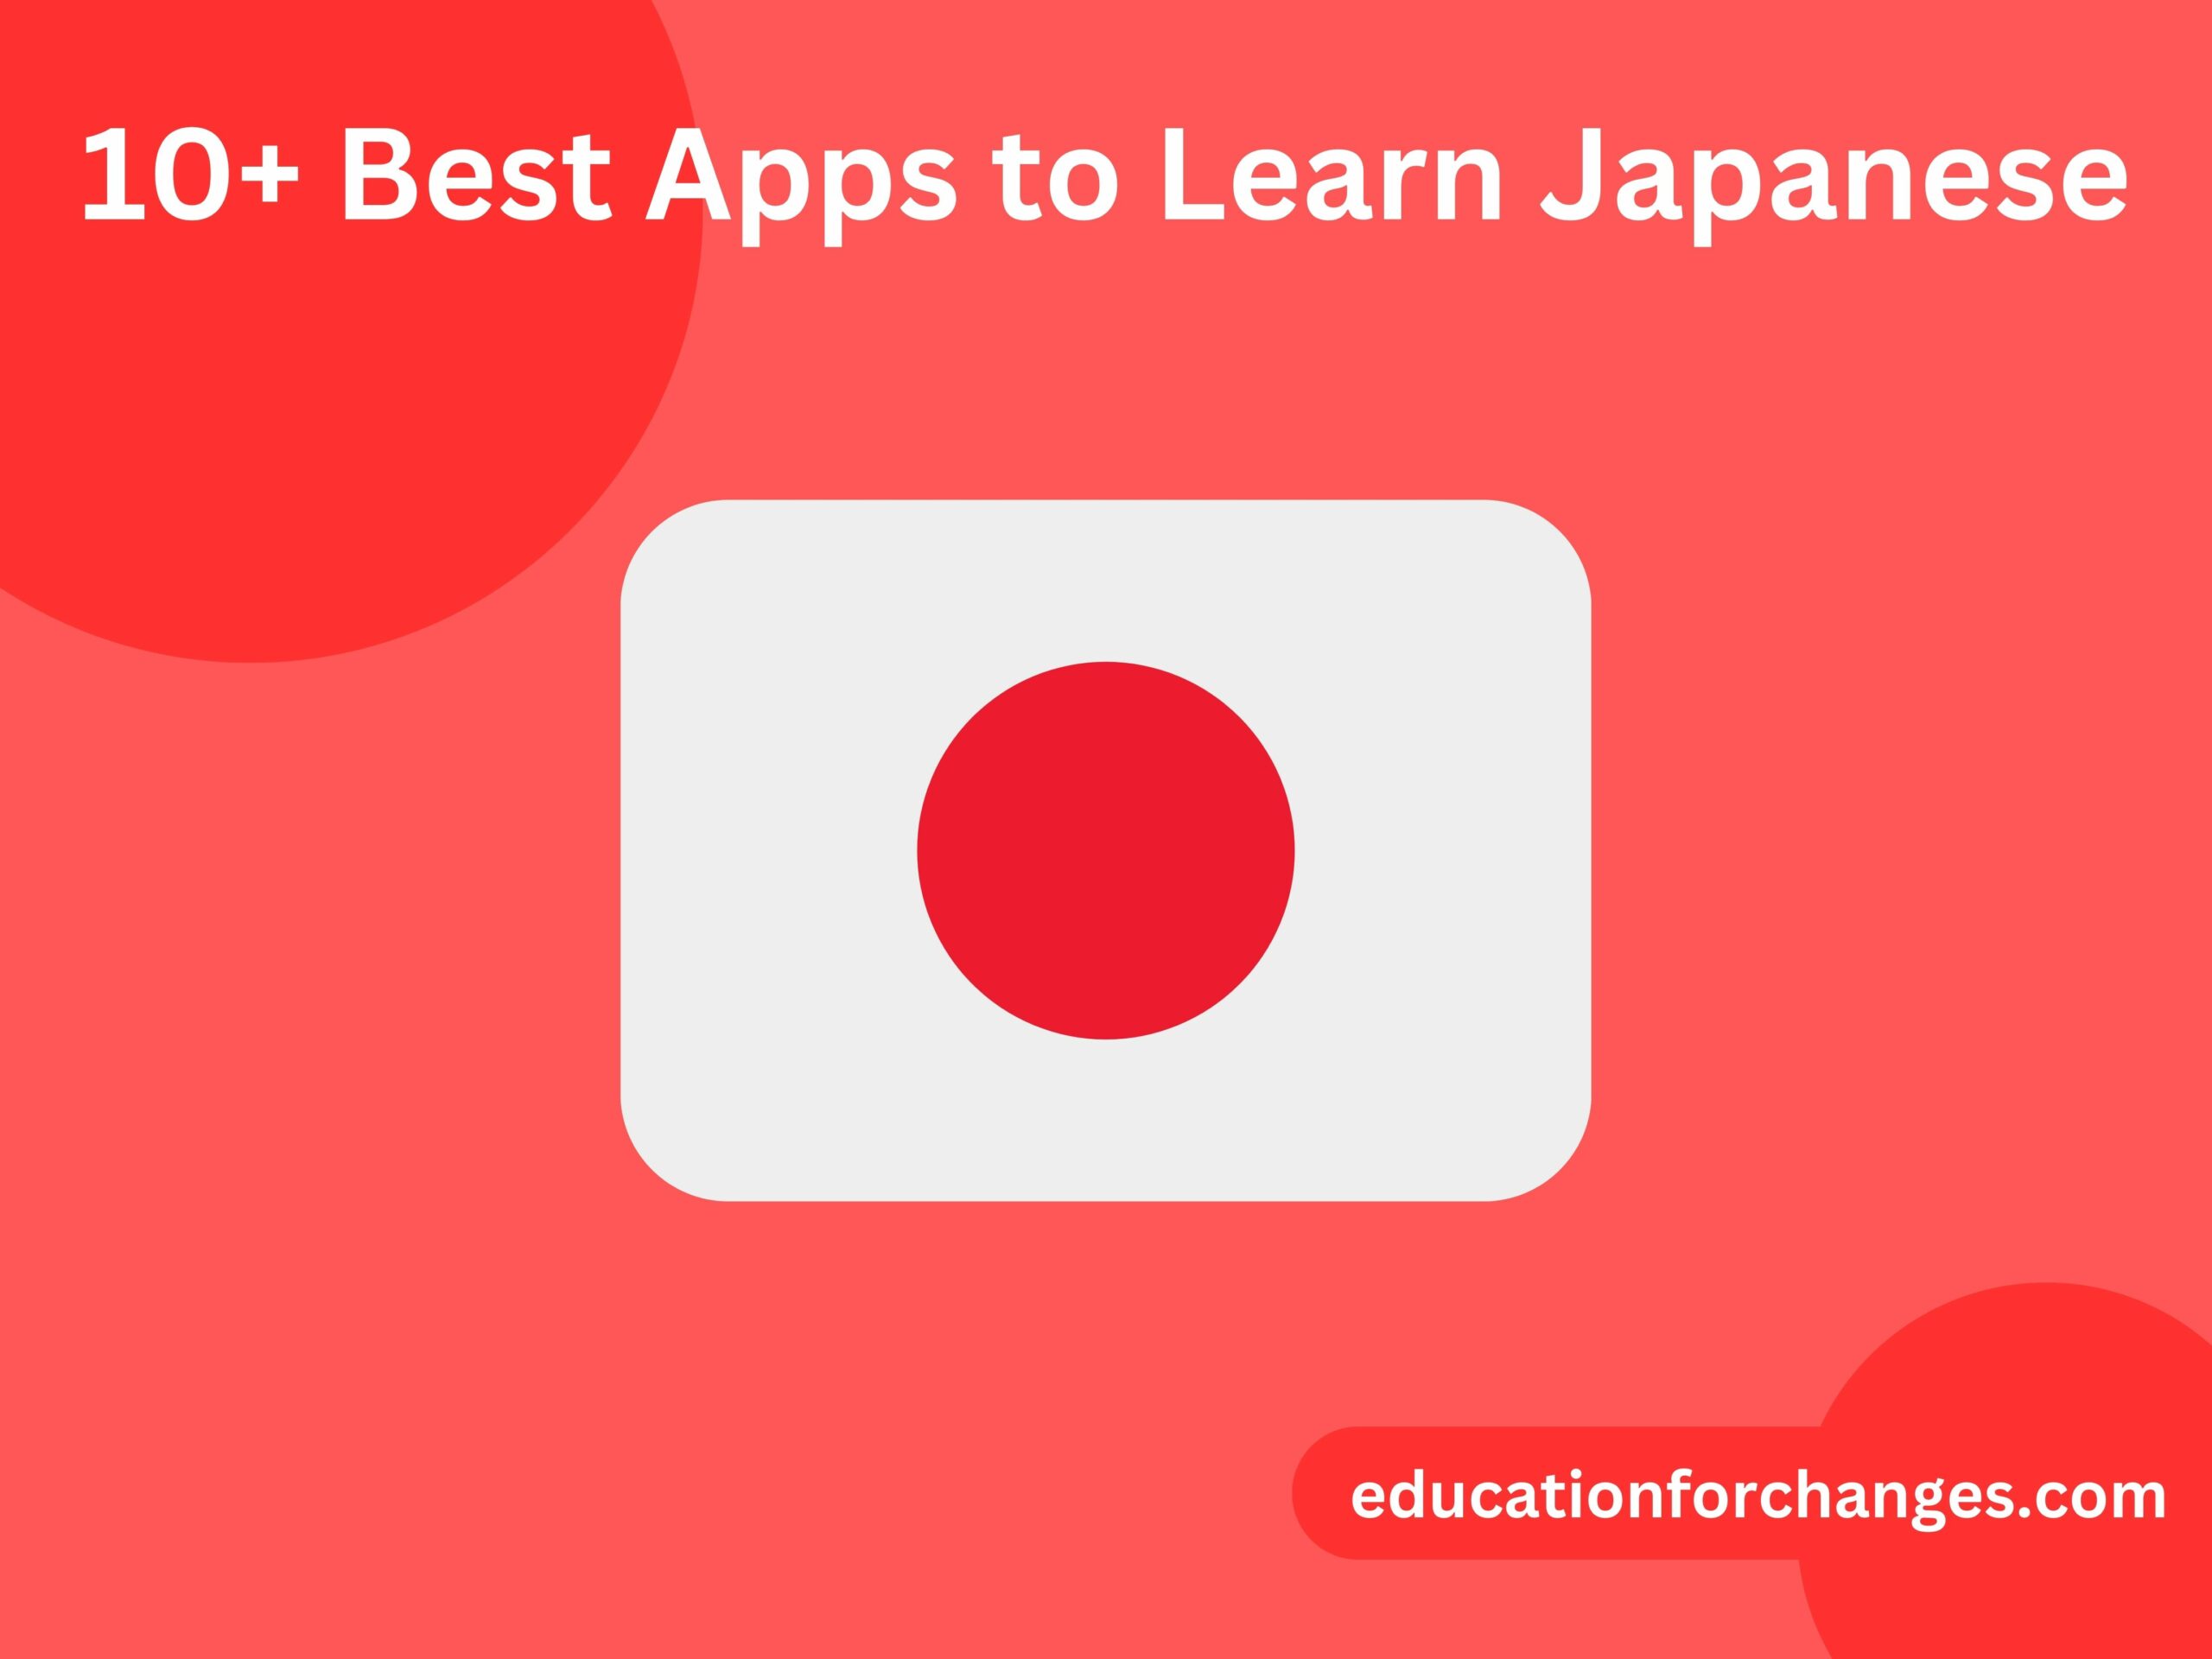 10+ Best Apps to Learn Japanese